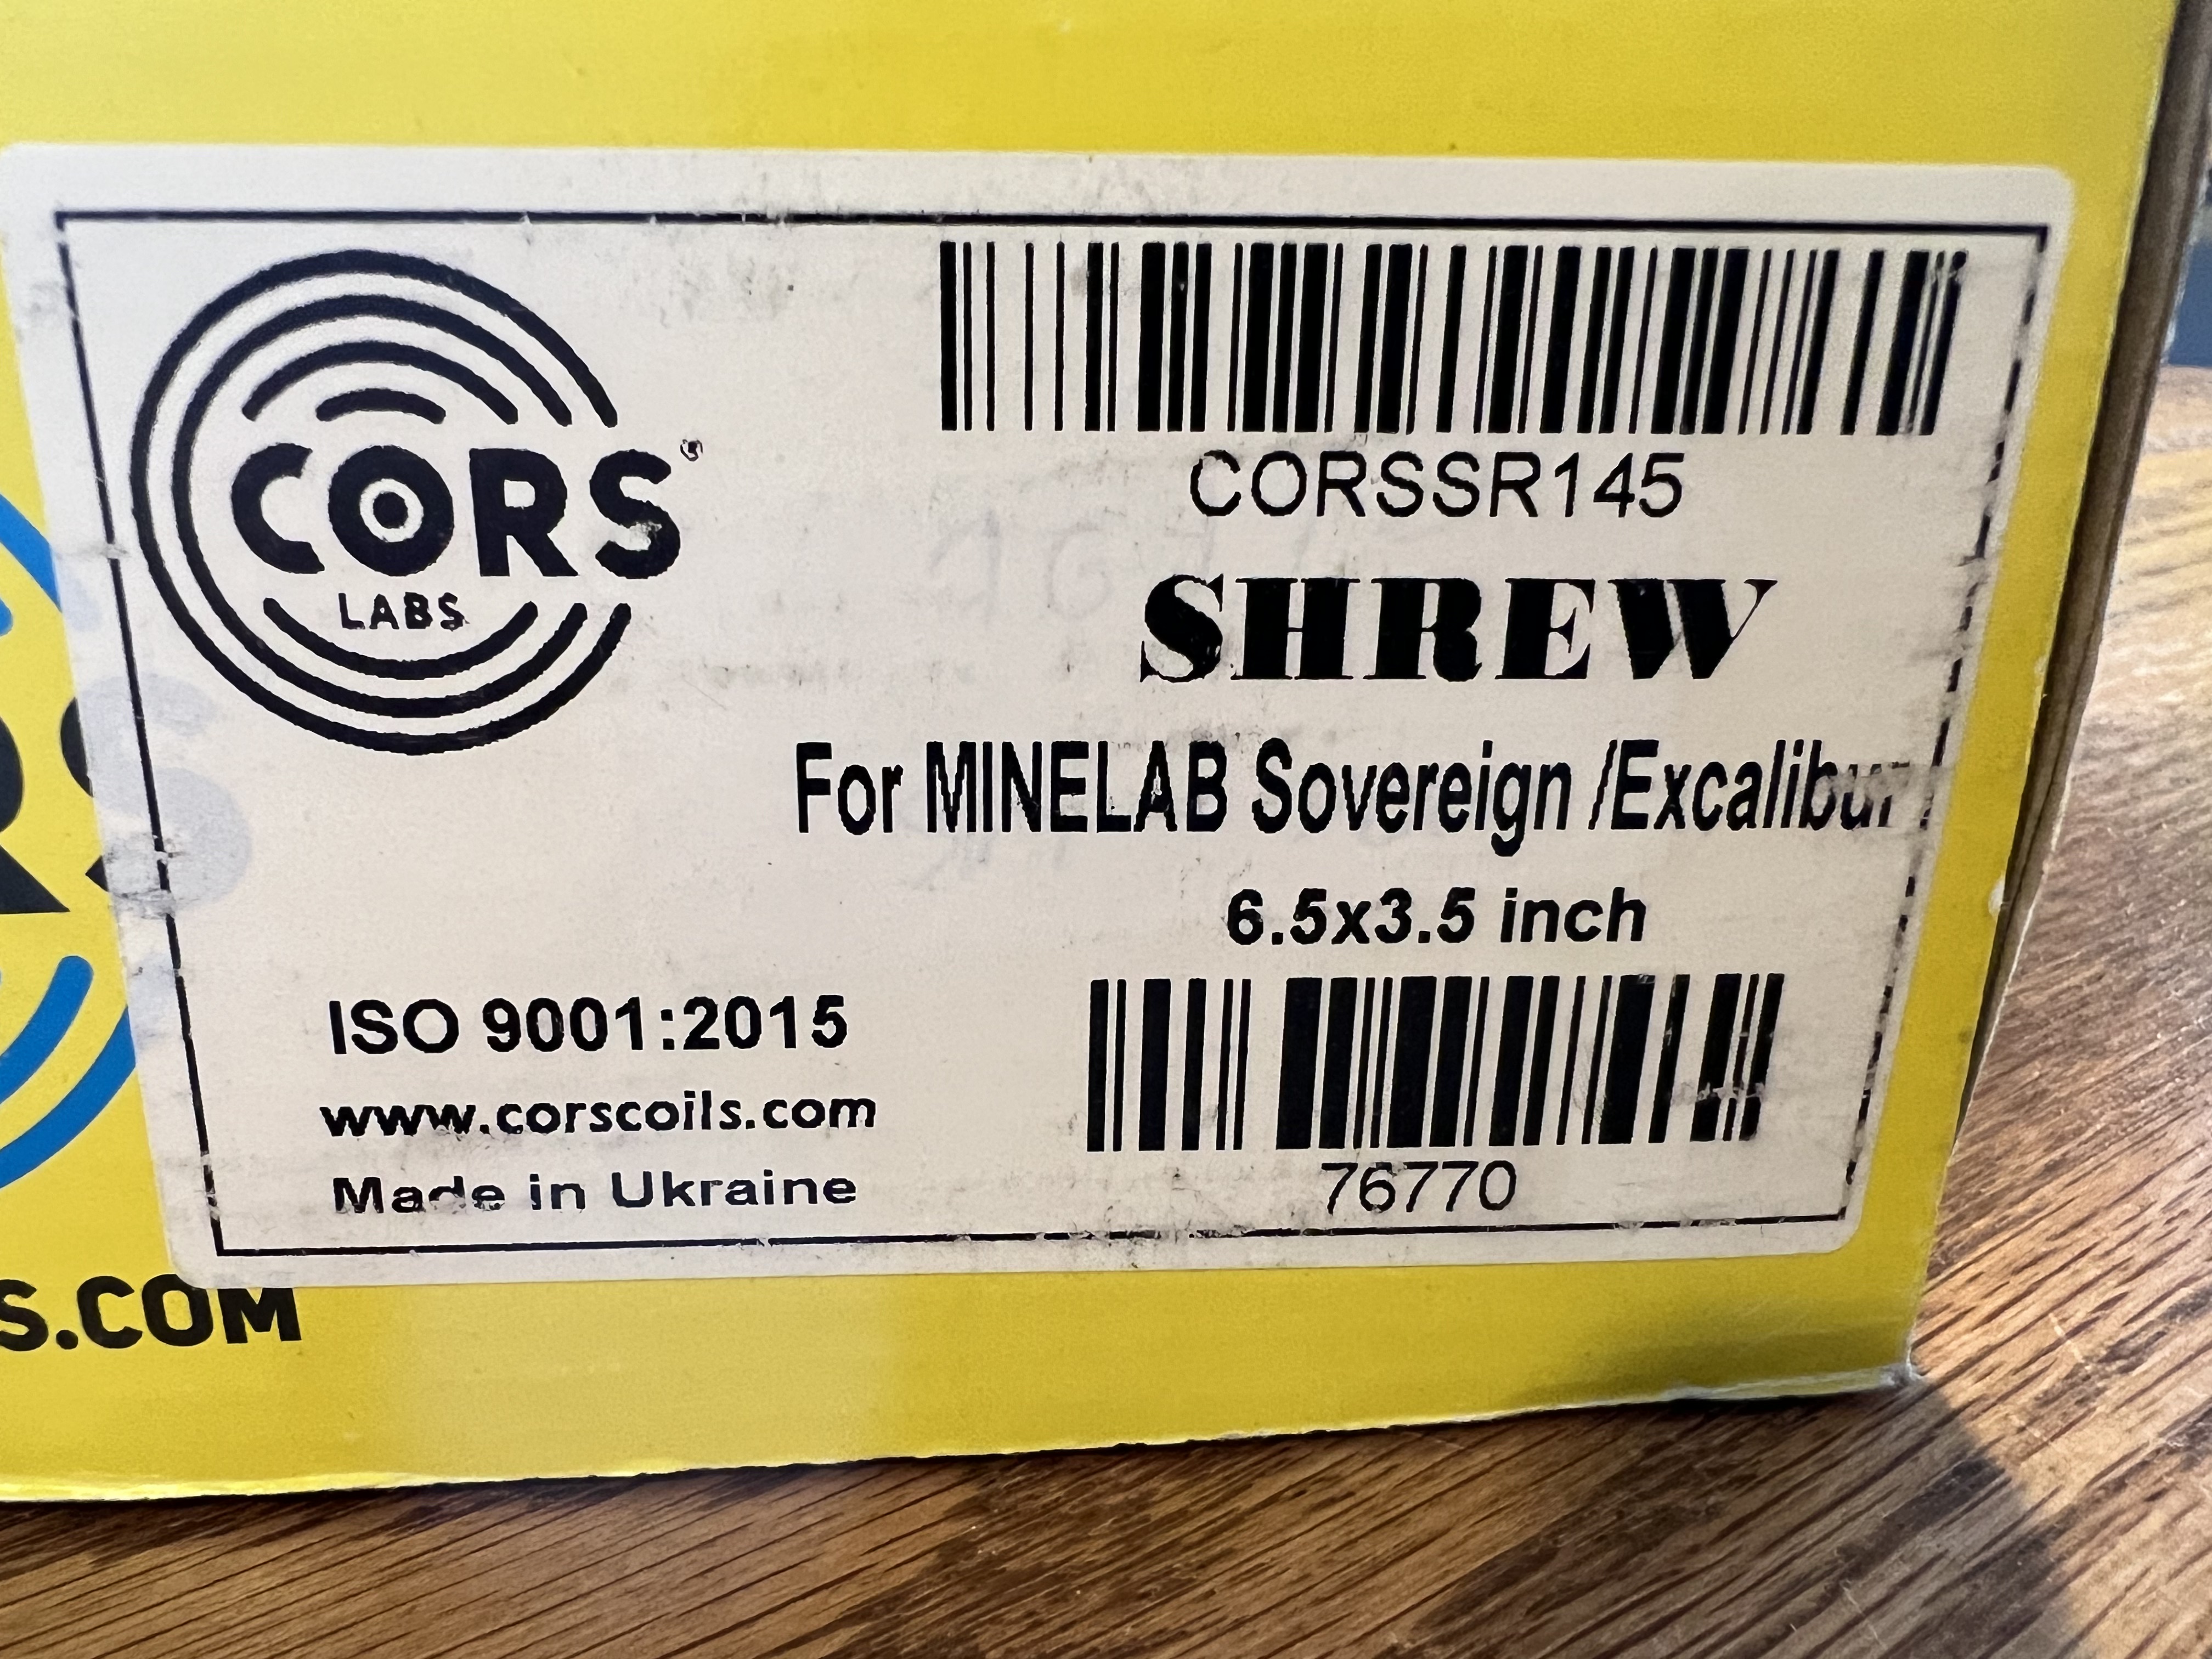 CORS Shrew for Minelab Sovereign and Excalibur